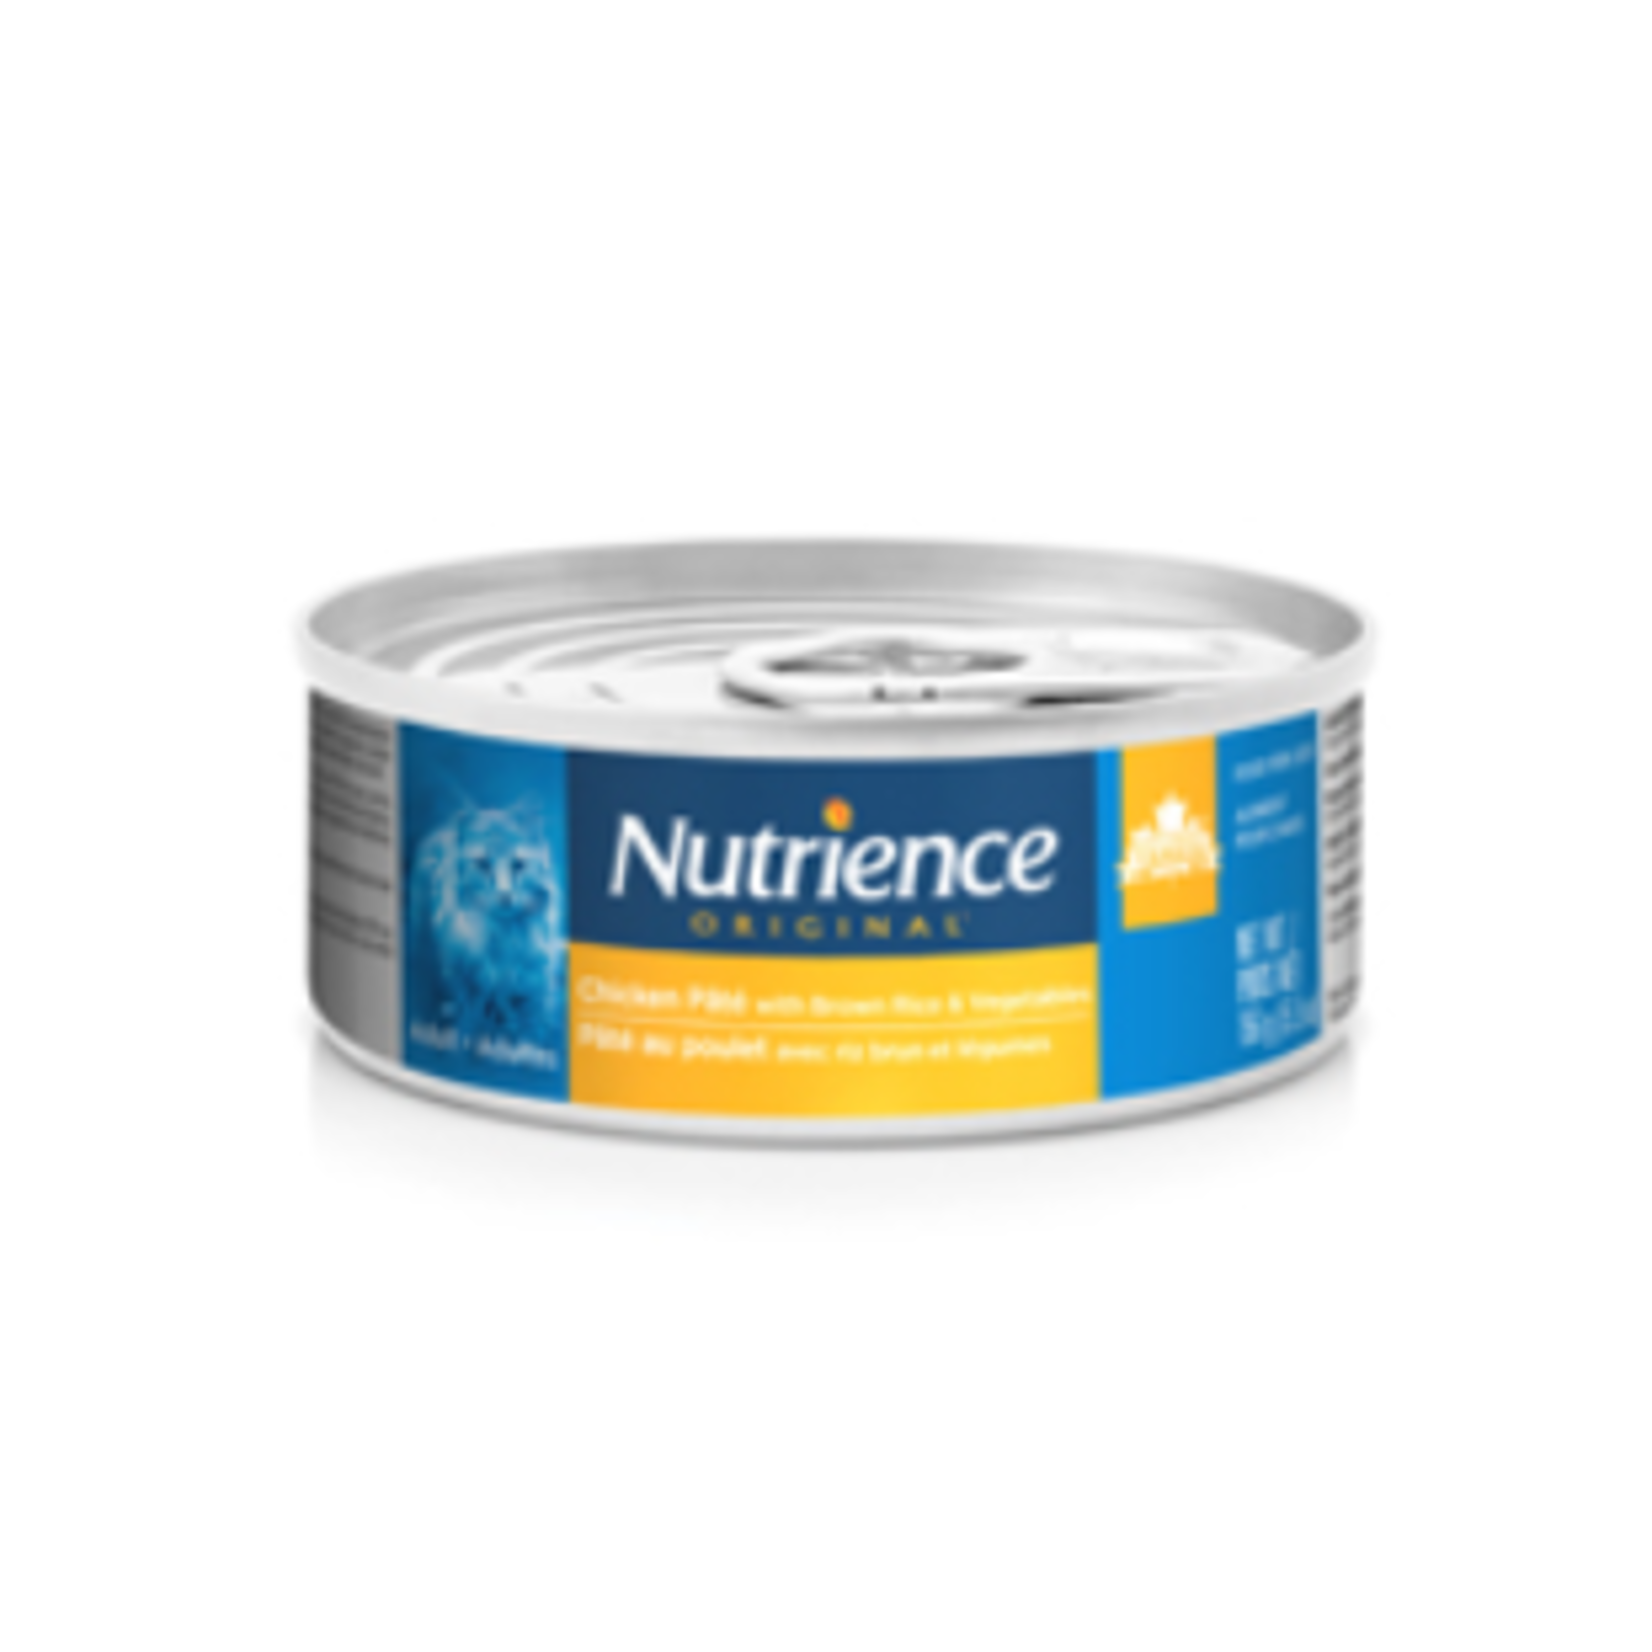 Nutrience Original Adult - Chicken Pâté with Brown Rice & Vegetables - 156 g